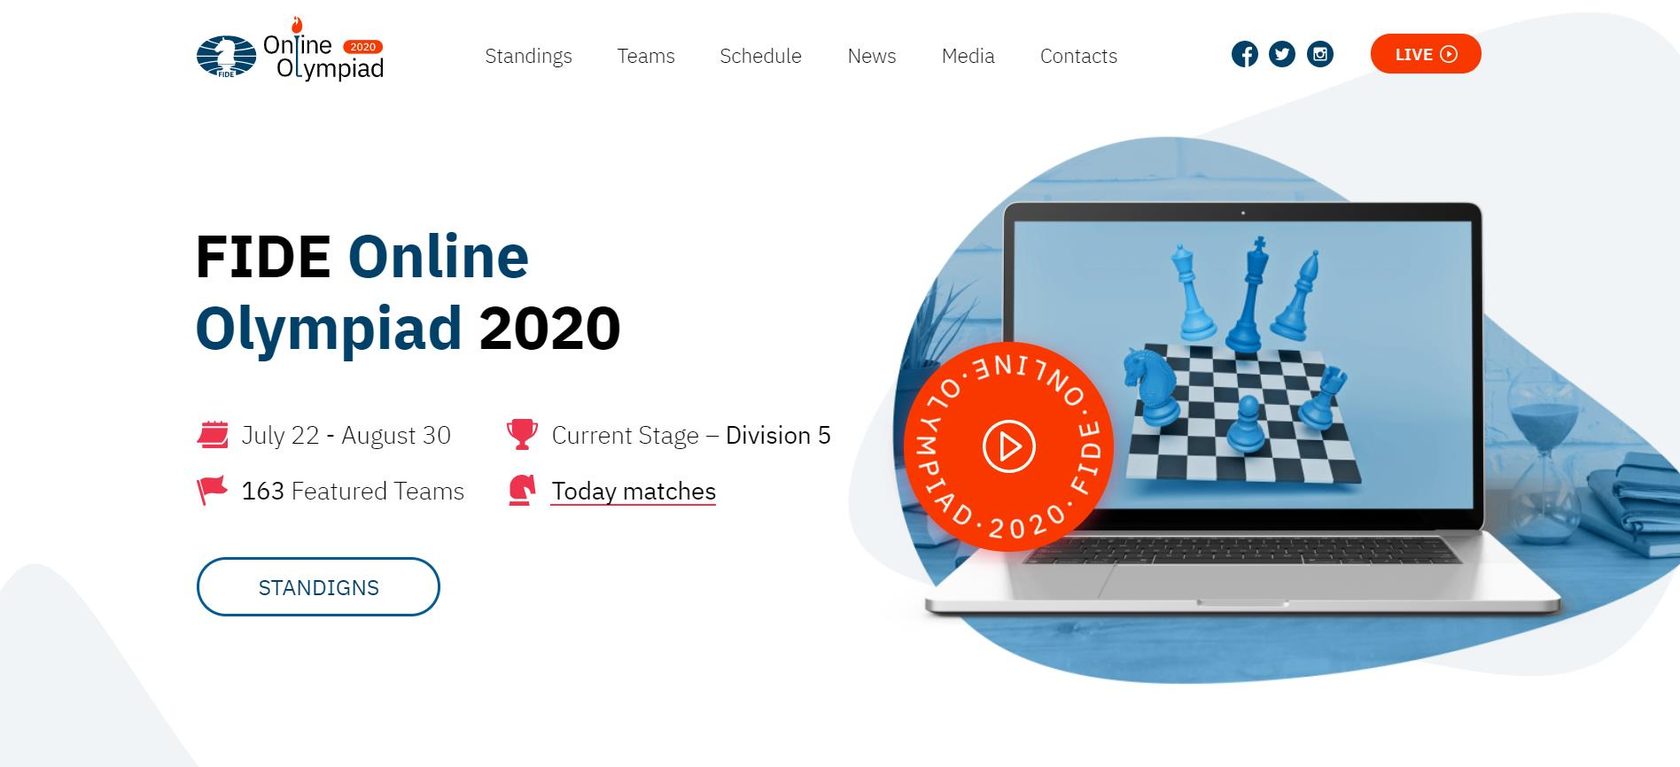 What's New on FIDE Online Arena: October 2021